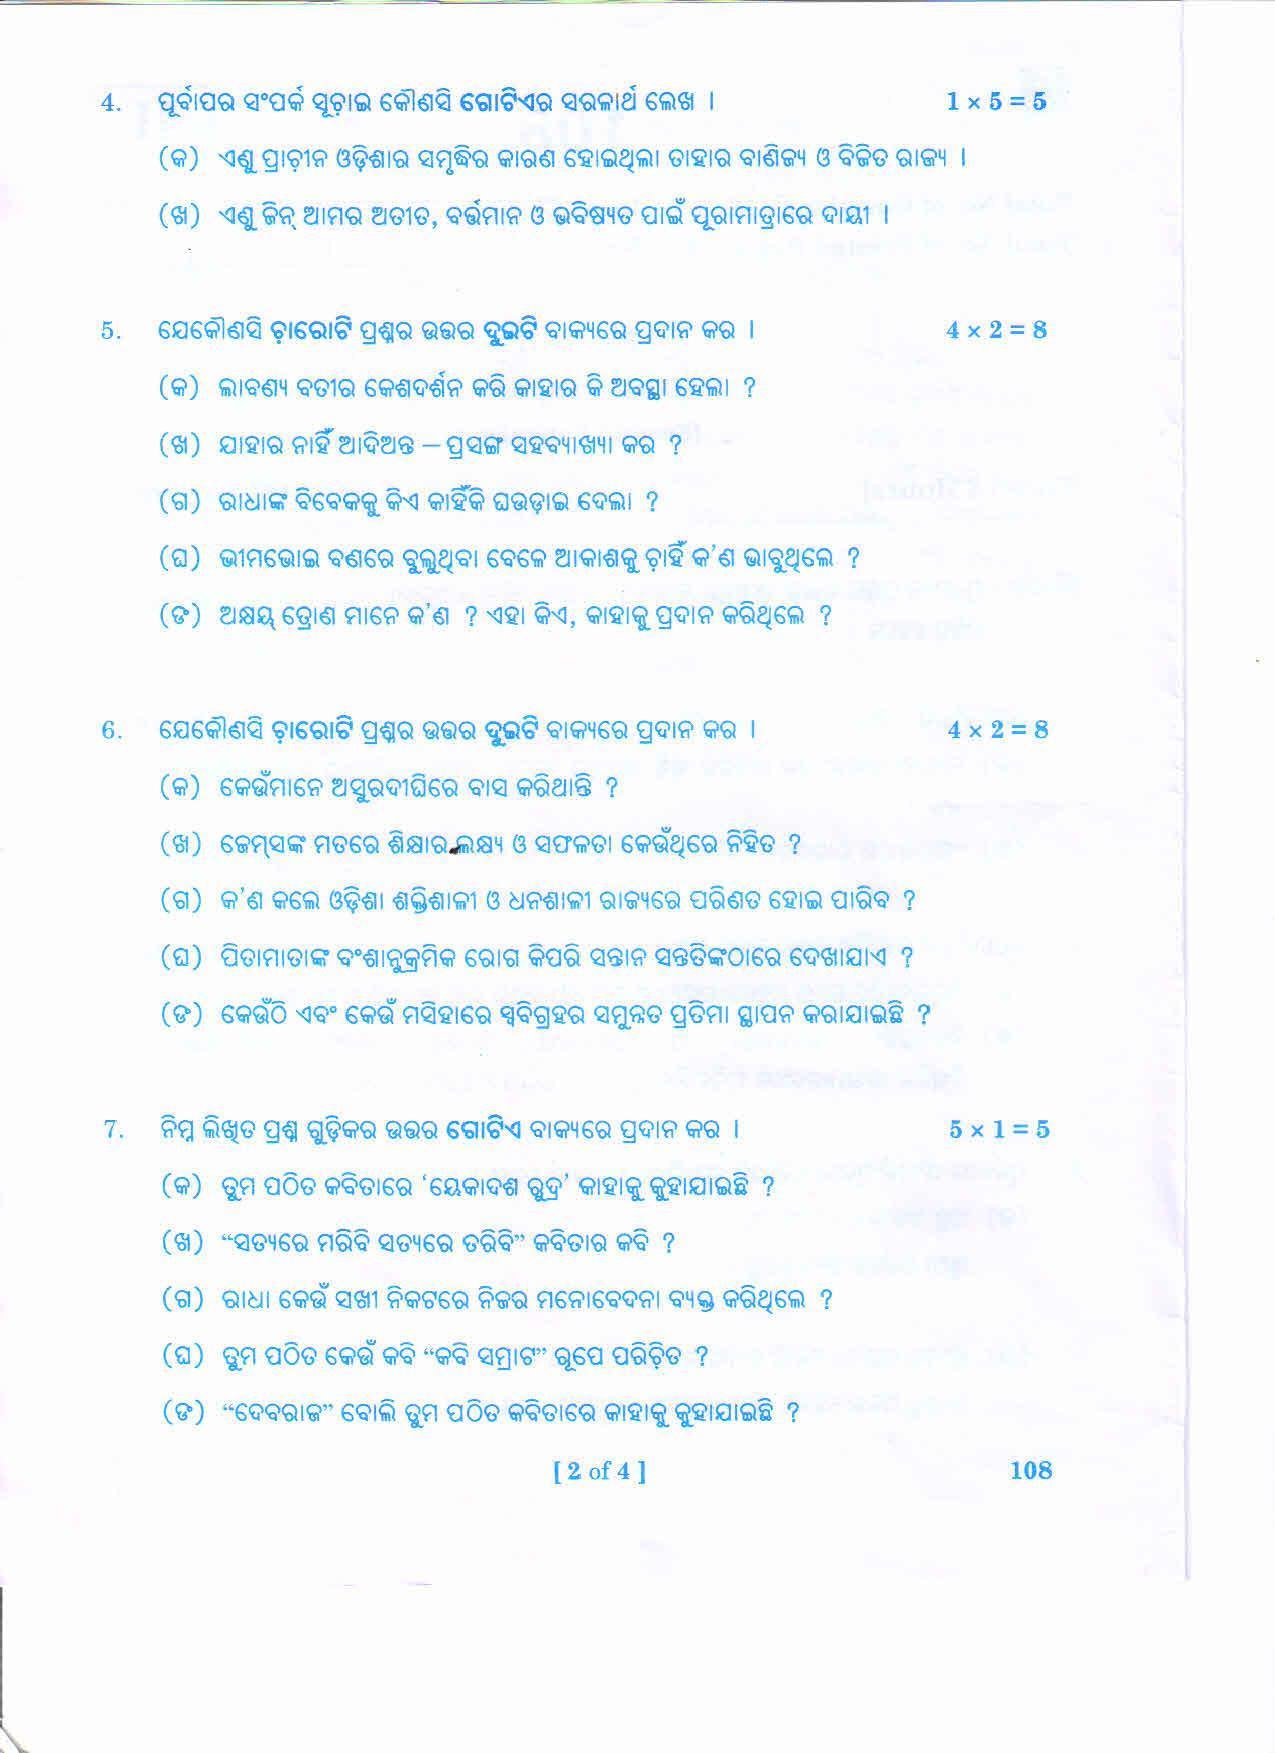 AP 2nd Year General Question Paper March - 2020 - ODIYA-I - Page 2